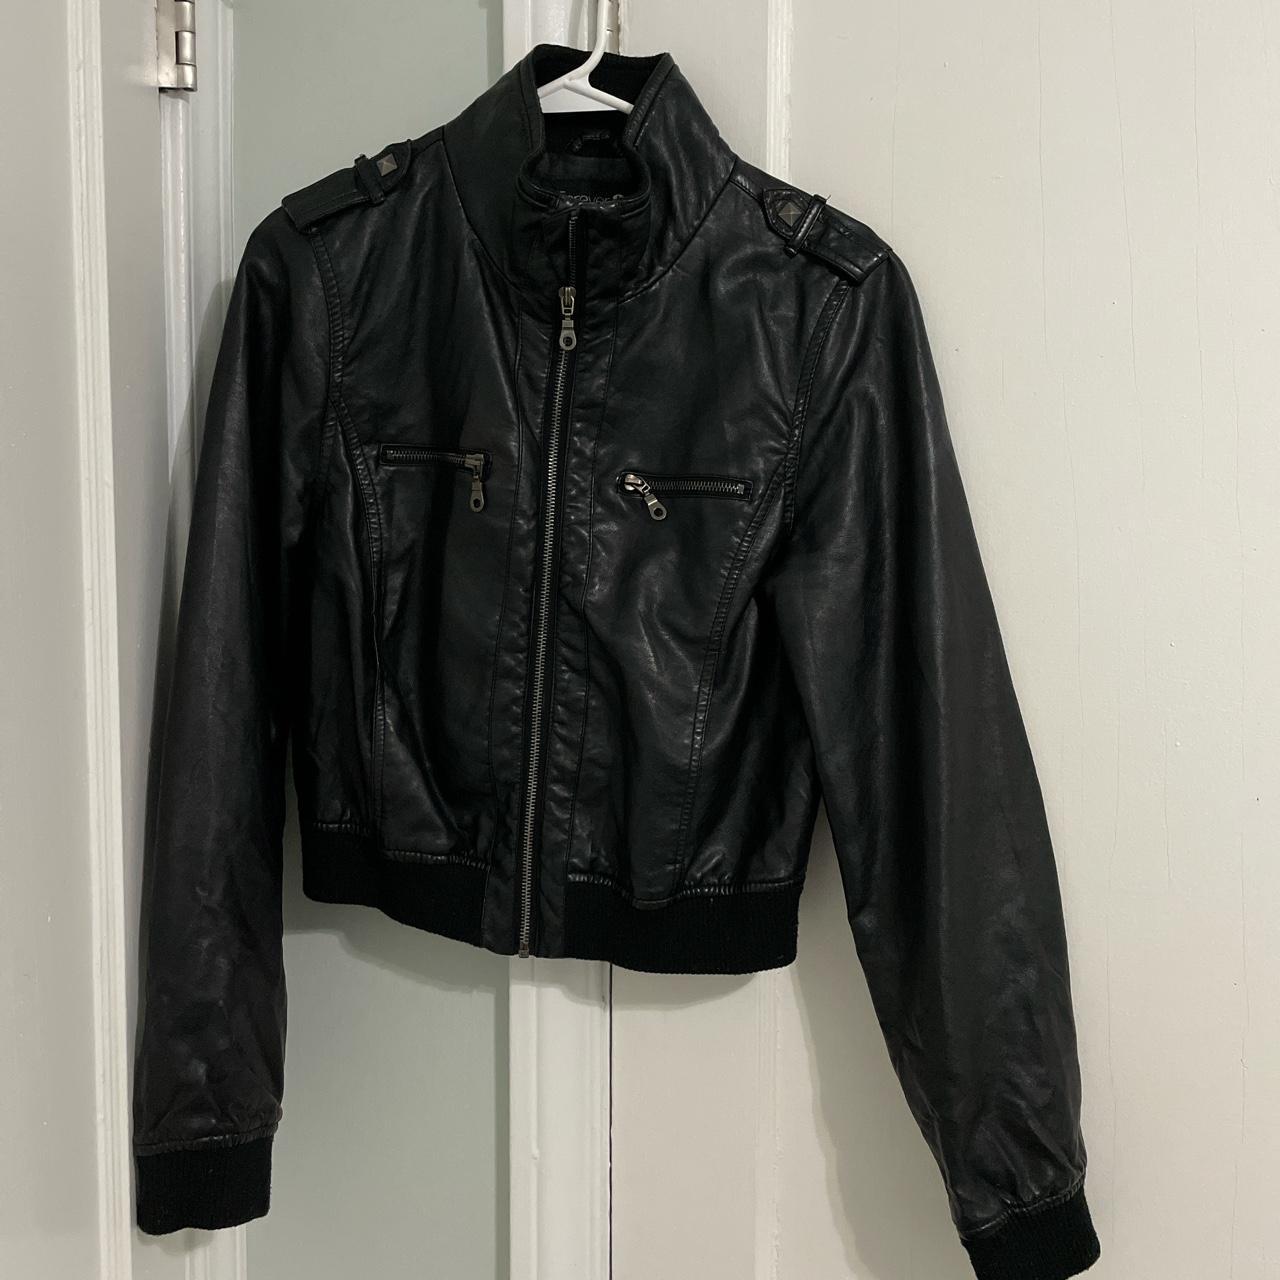 Classic black pleather jacket! So durable and... - Depop